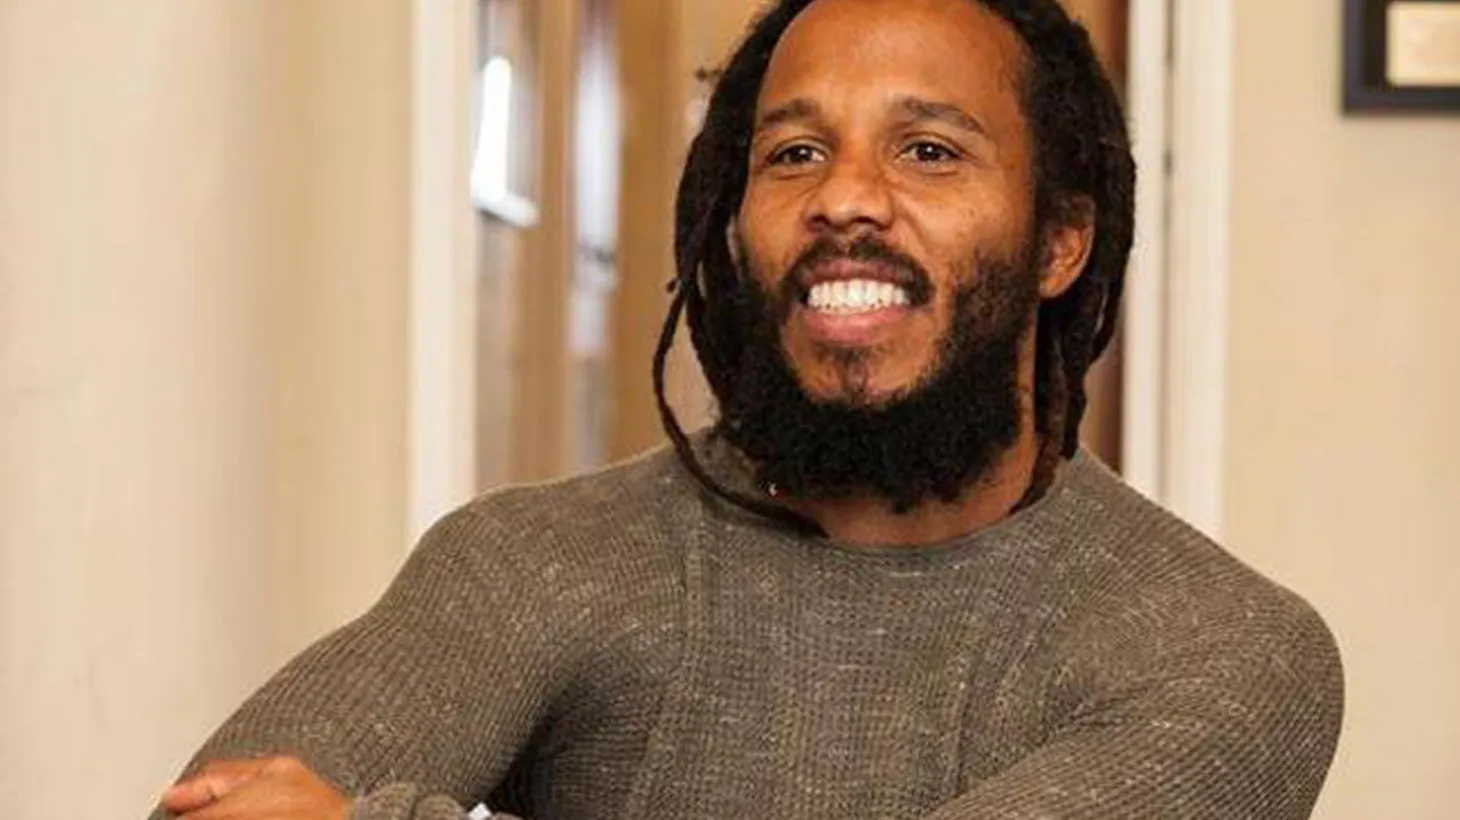 Ziggy Marley focuses his creative energy on spreading a message of conscious humanity.